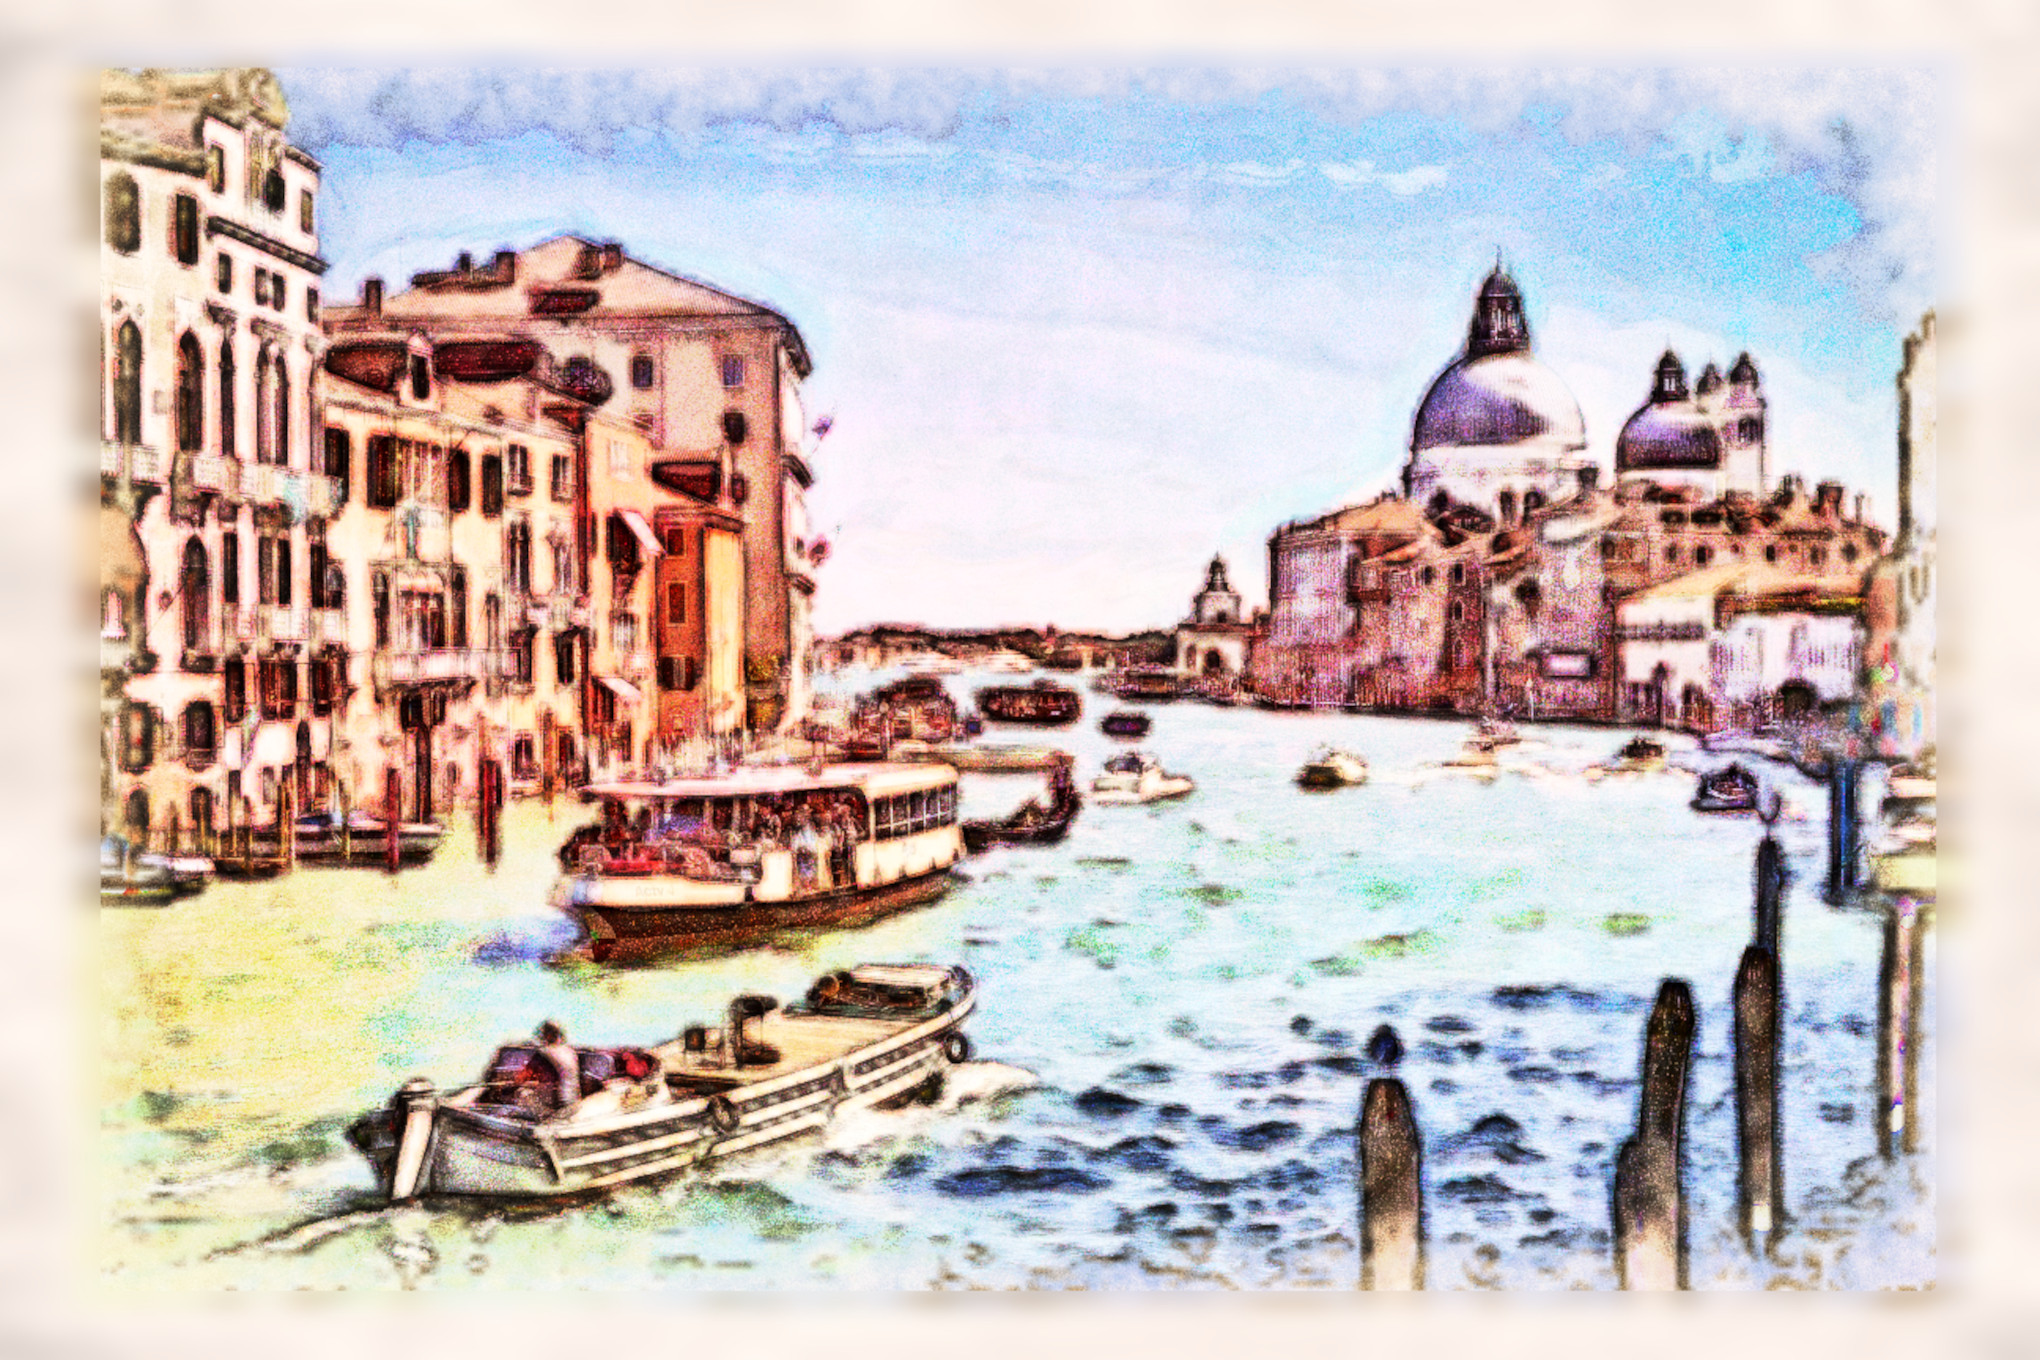 2023-09-30 12-42-33 venice-5090764 with a Watercolor Pastels Effect 2023 (4.0,80.0,30.0,40.0,10.0,8.0,80.0,True,0).jpg